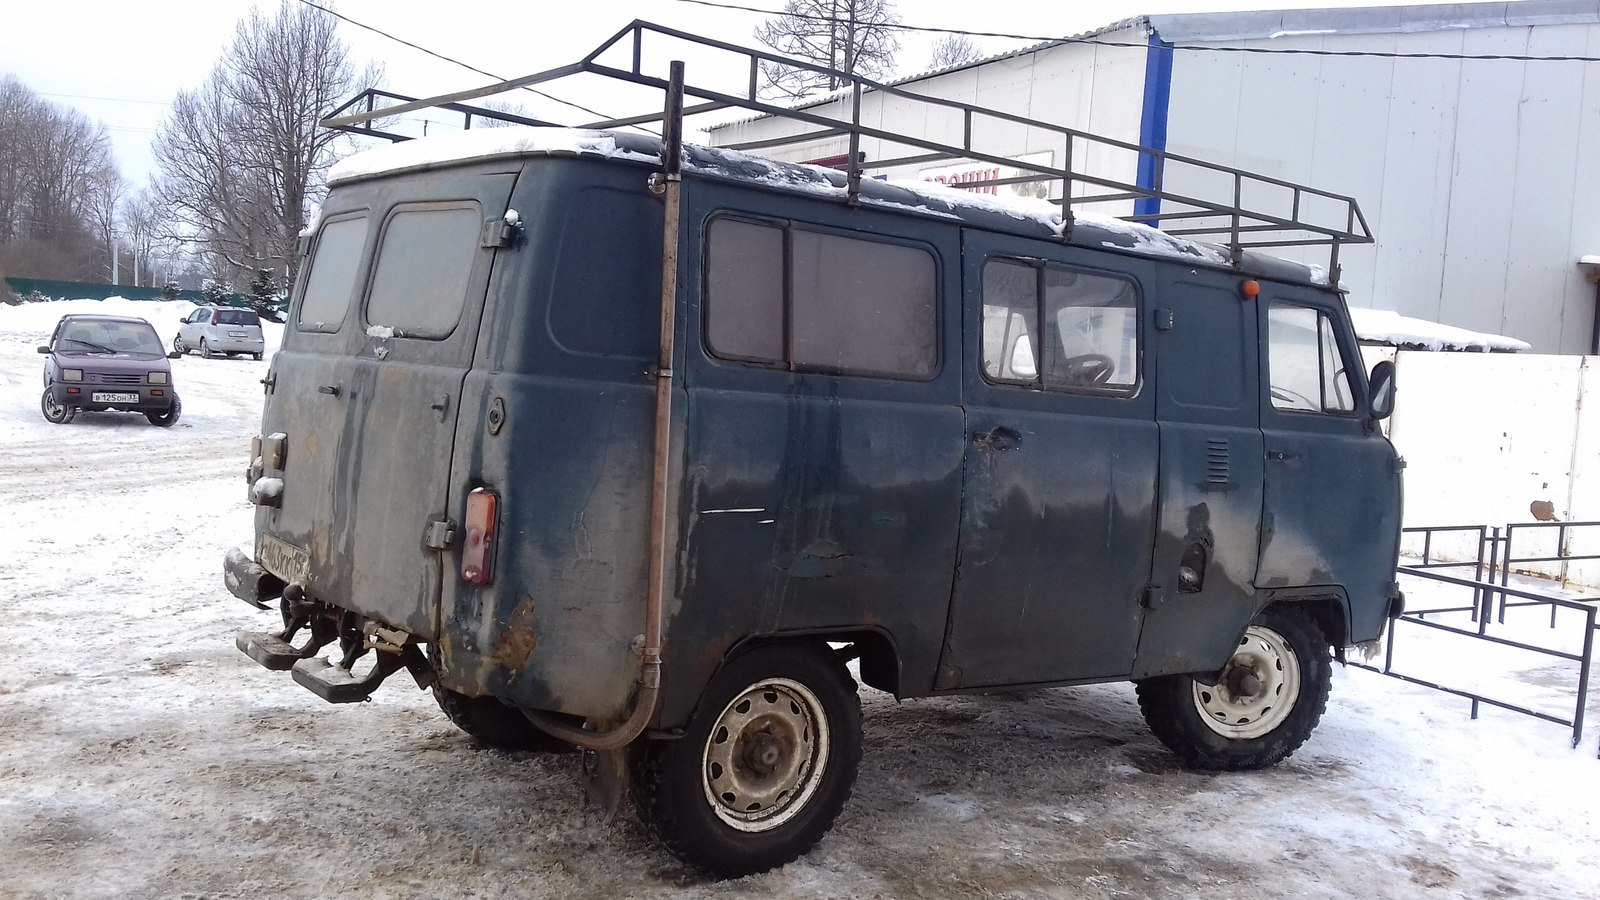 Bosozoku in Russian (Japanese exhaust system tuning) - Loaf, UAZ, Tuning, bosozoku, My